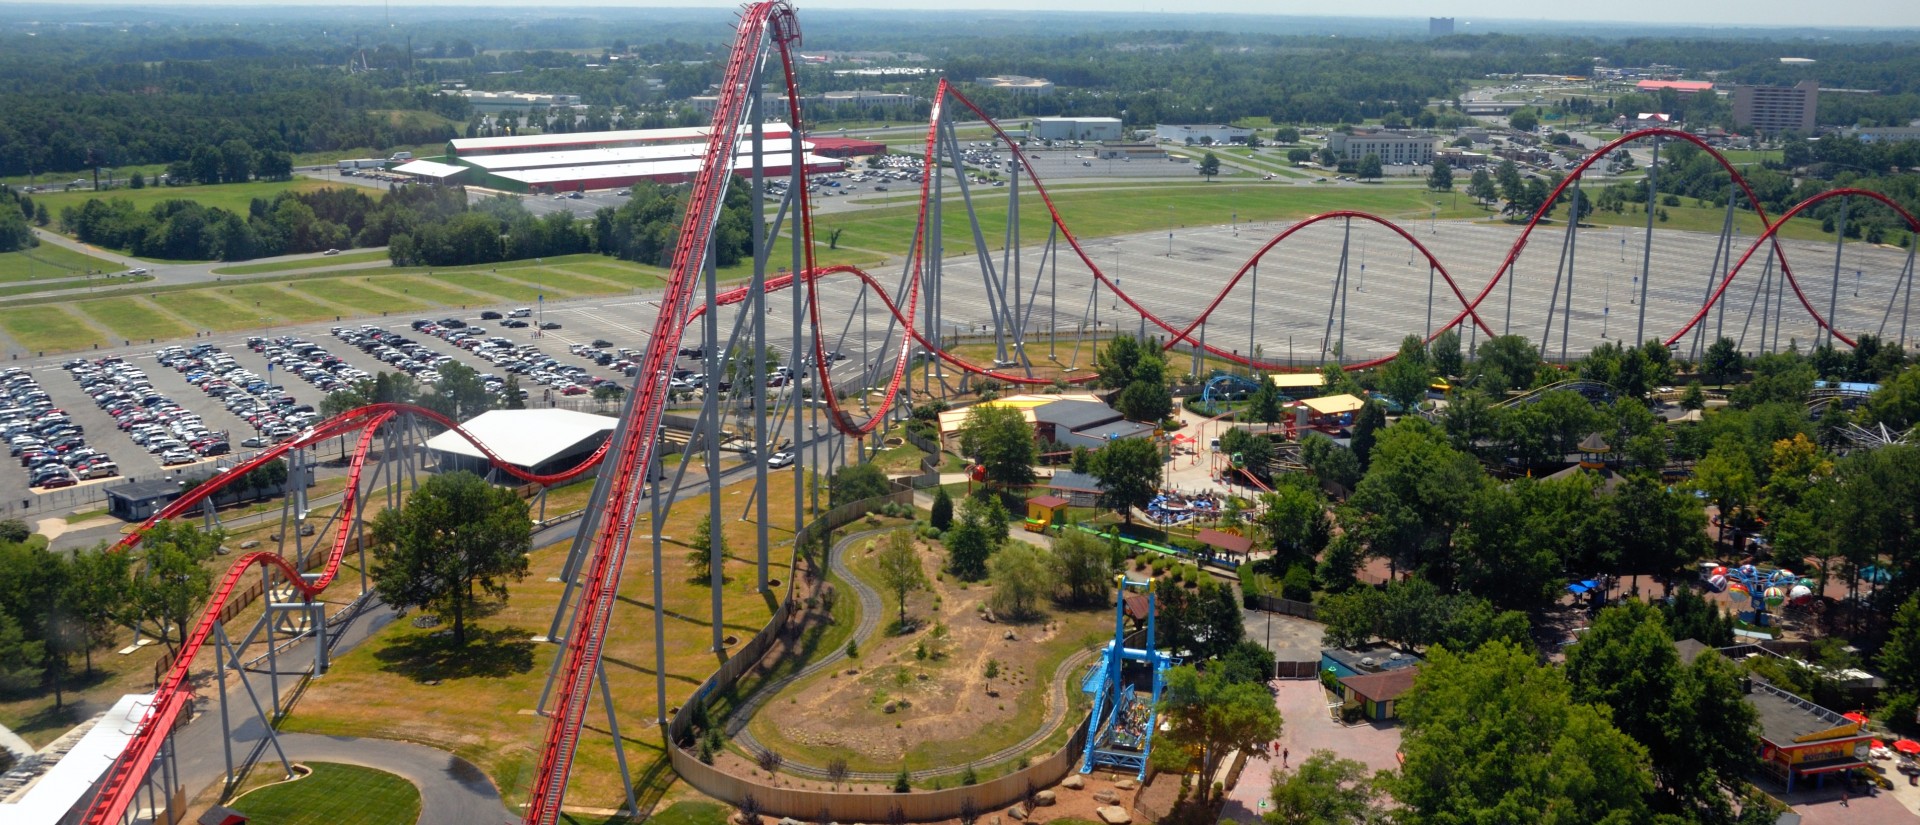 Aerial View Of Roller Coaster